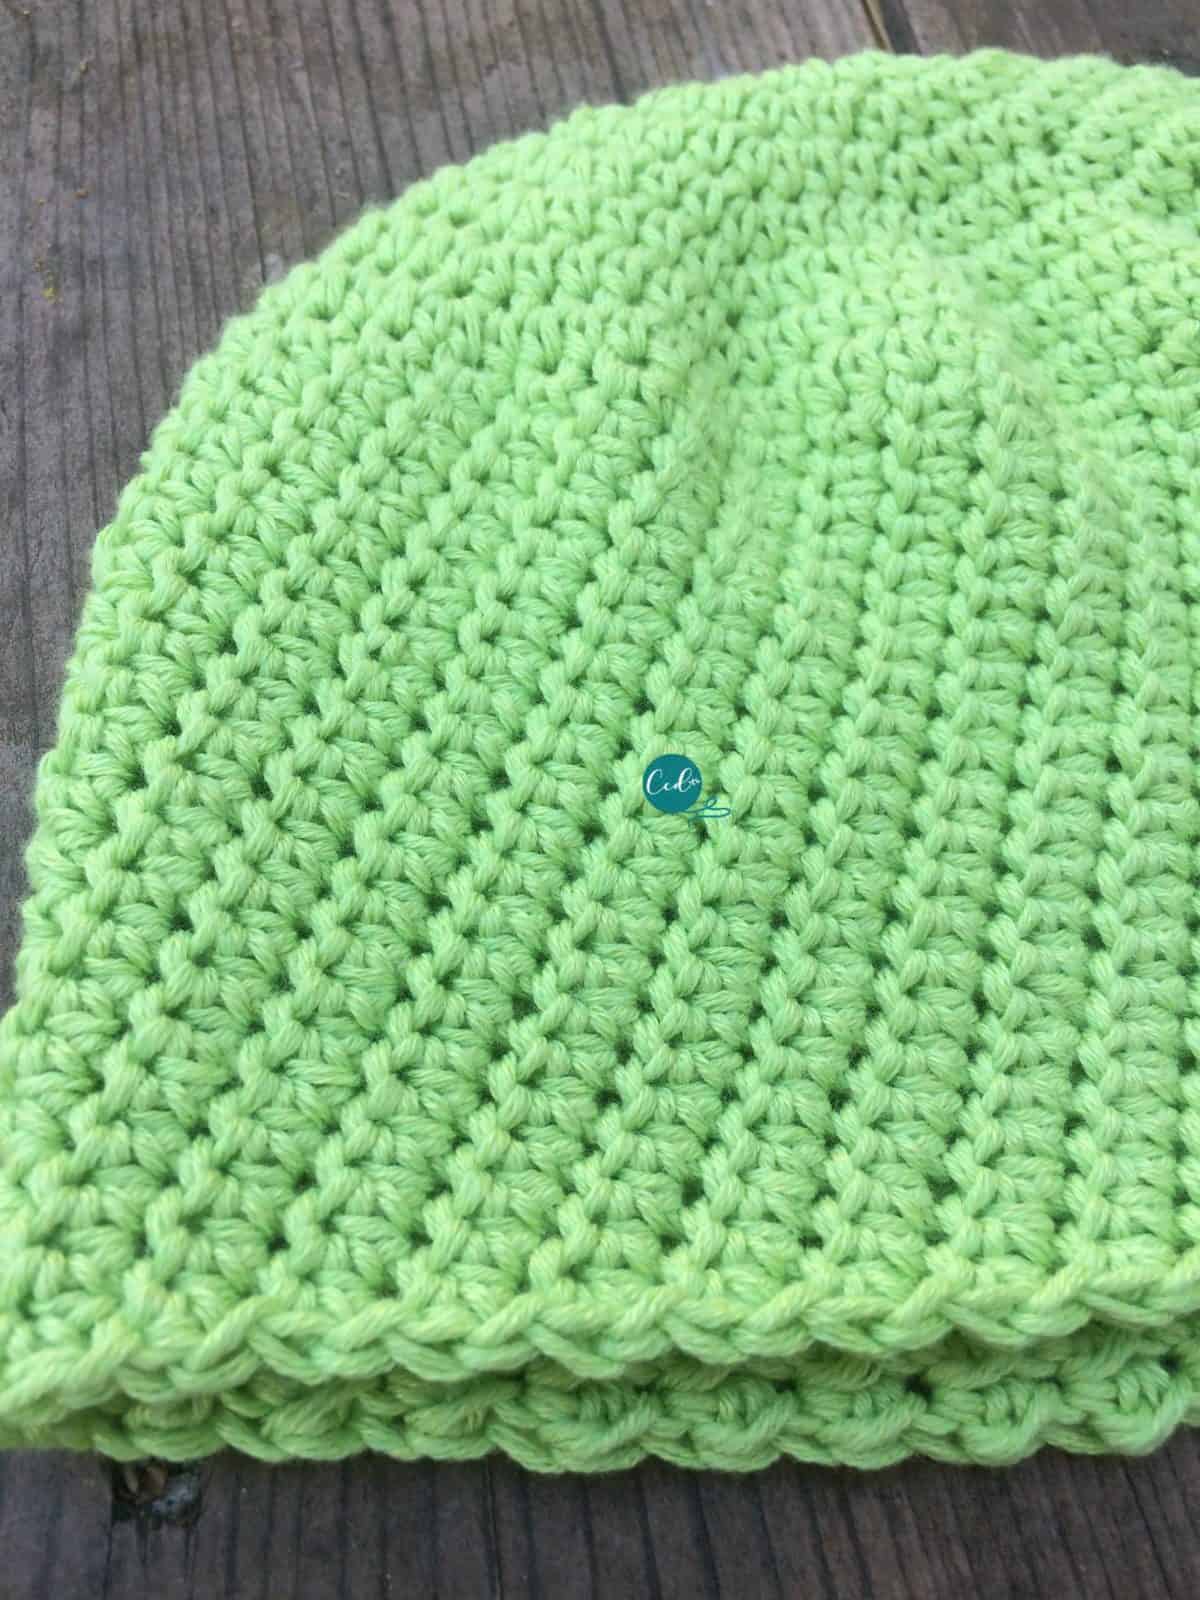 Close up of stitchwork on crochet chemo cap for summer.